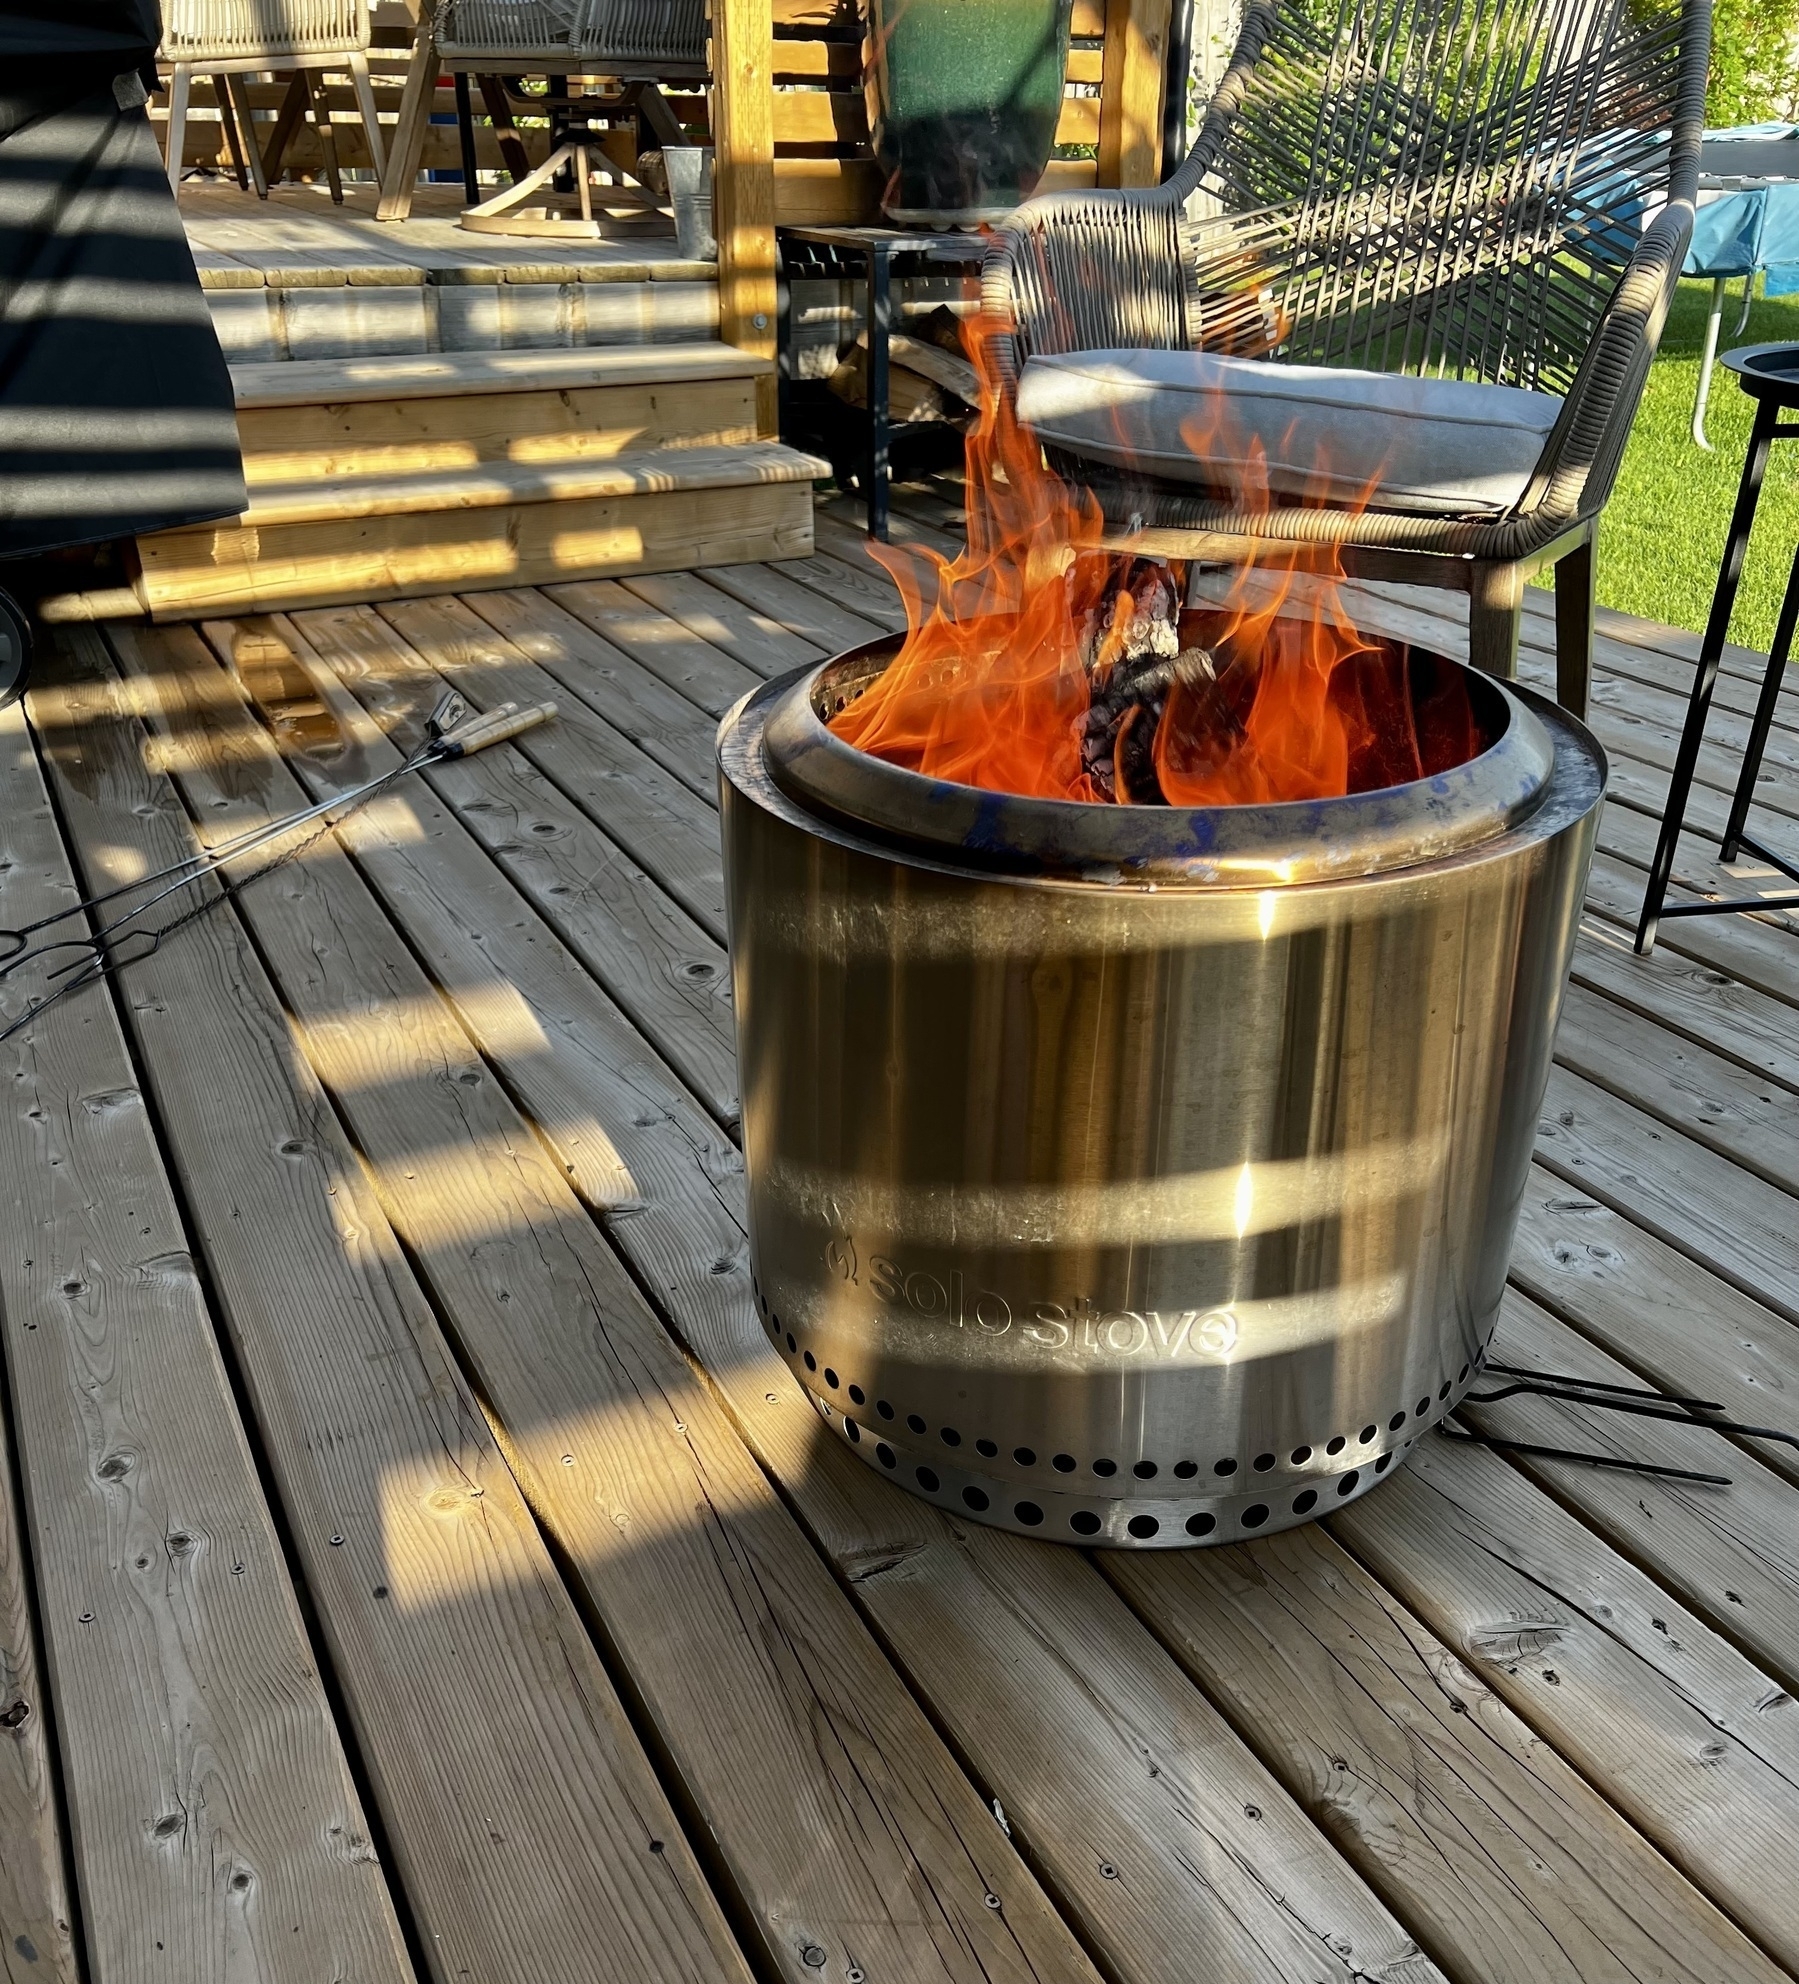 Fire on a deck in a solo stove fire 